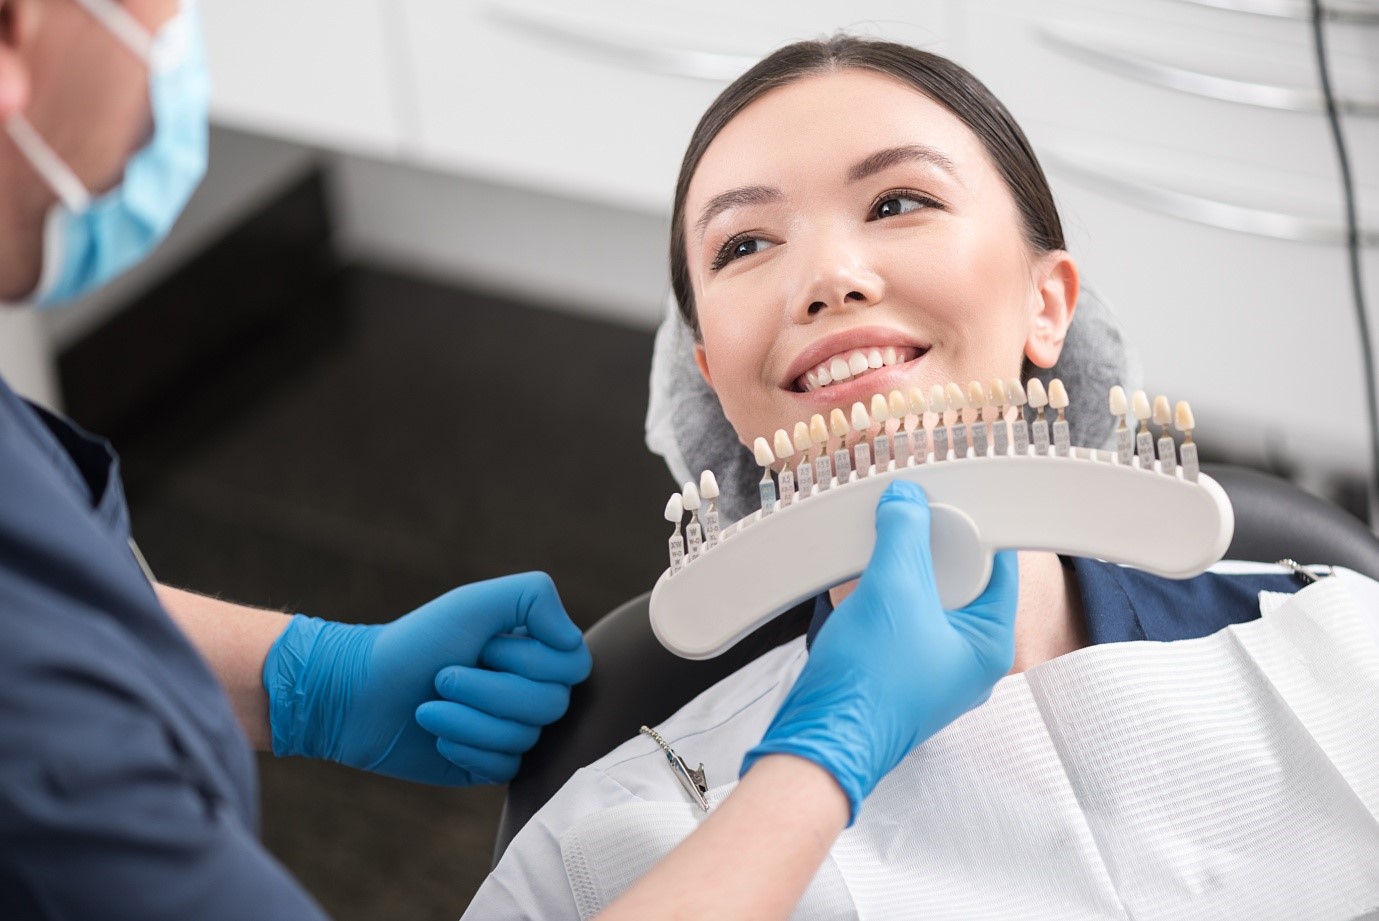 5 Cosmetic Dentistry Services That Can Improve Your Smile